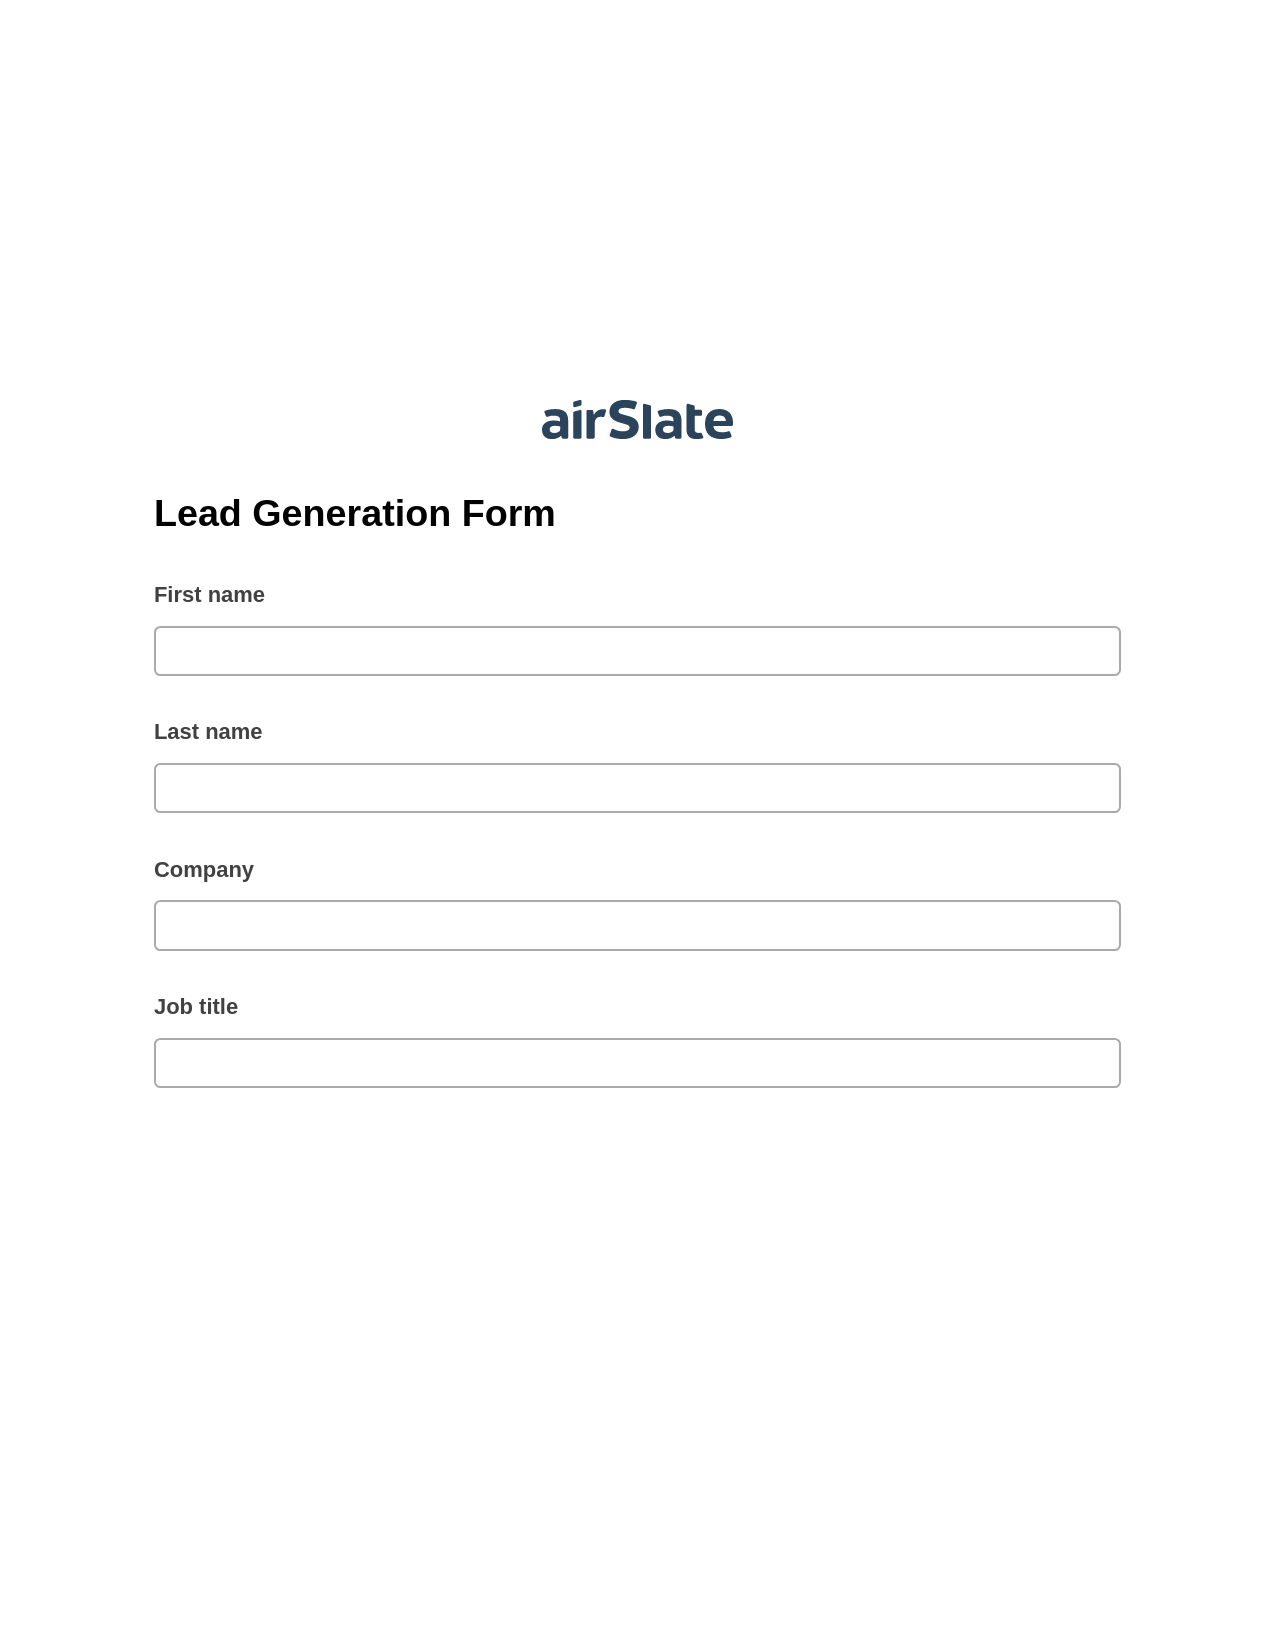 Lead Generation Form Pre-fill from Excel Spreadsheet Bot, Add Tags to Slate Bot, Archive to Dropbox Bot